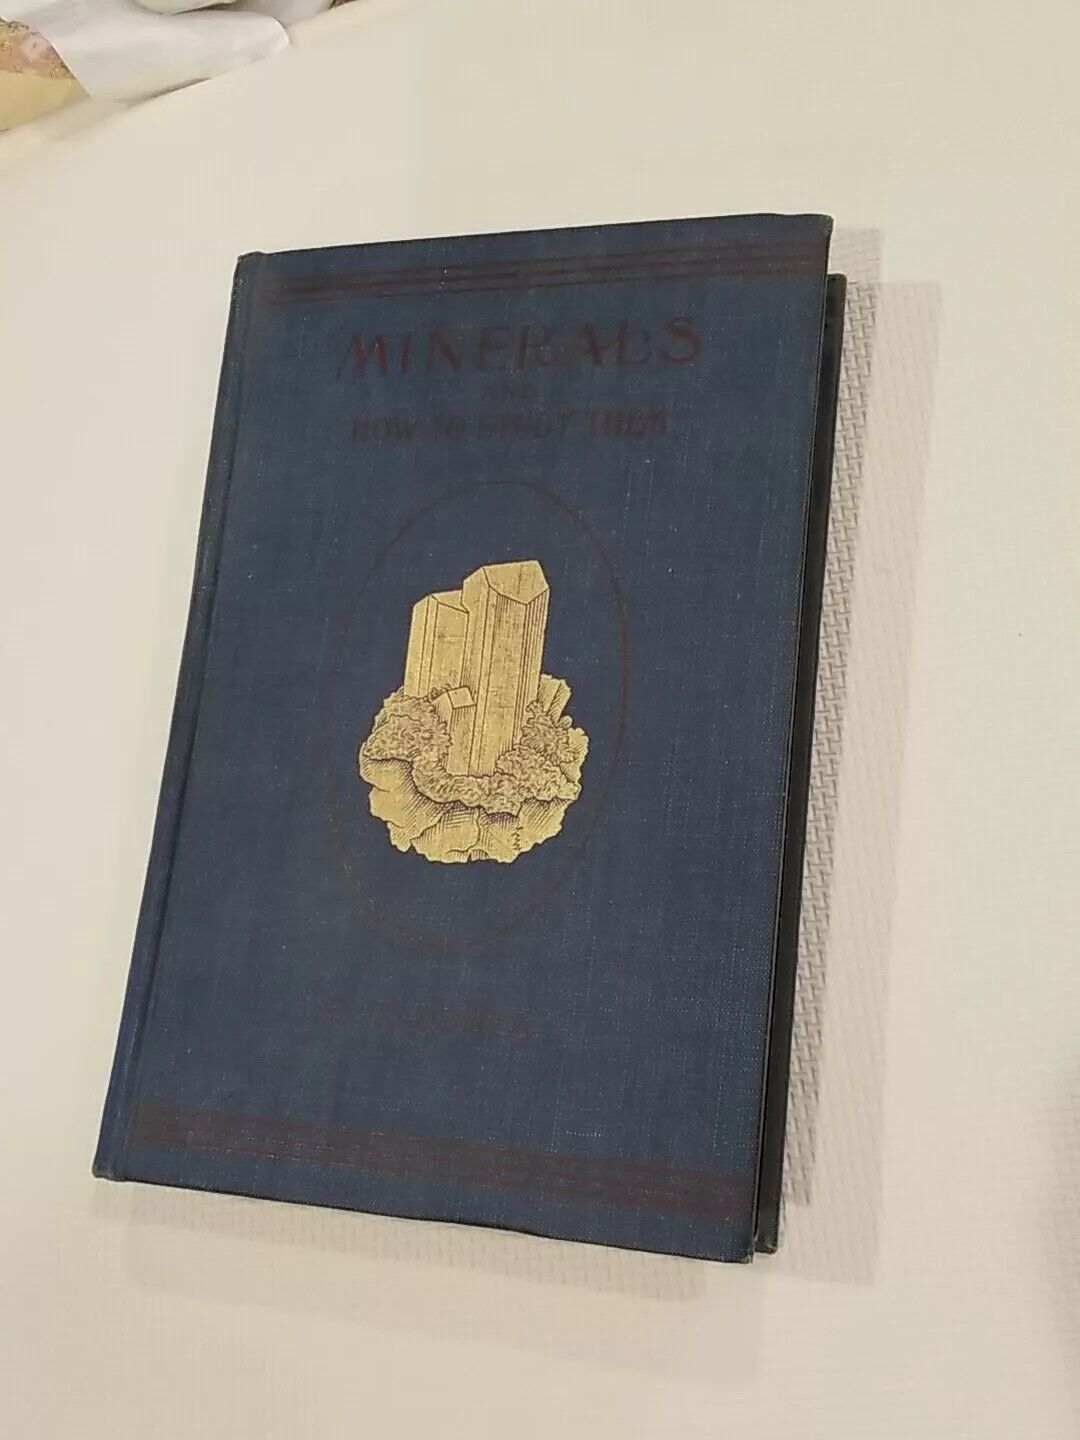 Minerals & How to Study Them.A Book For Beginners in Mineralogy .Sec Ed 1901 